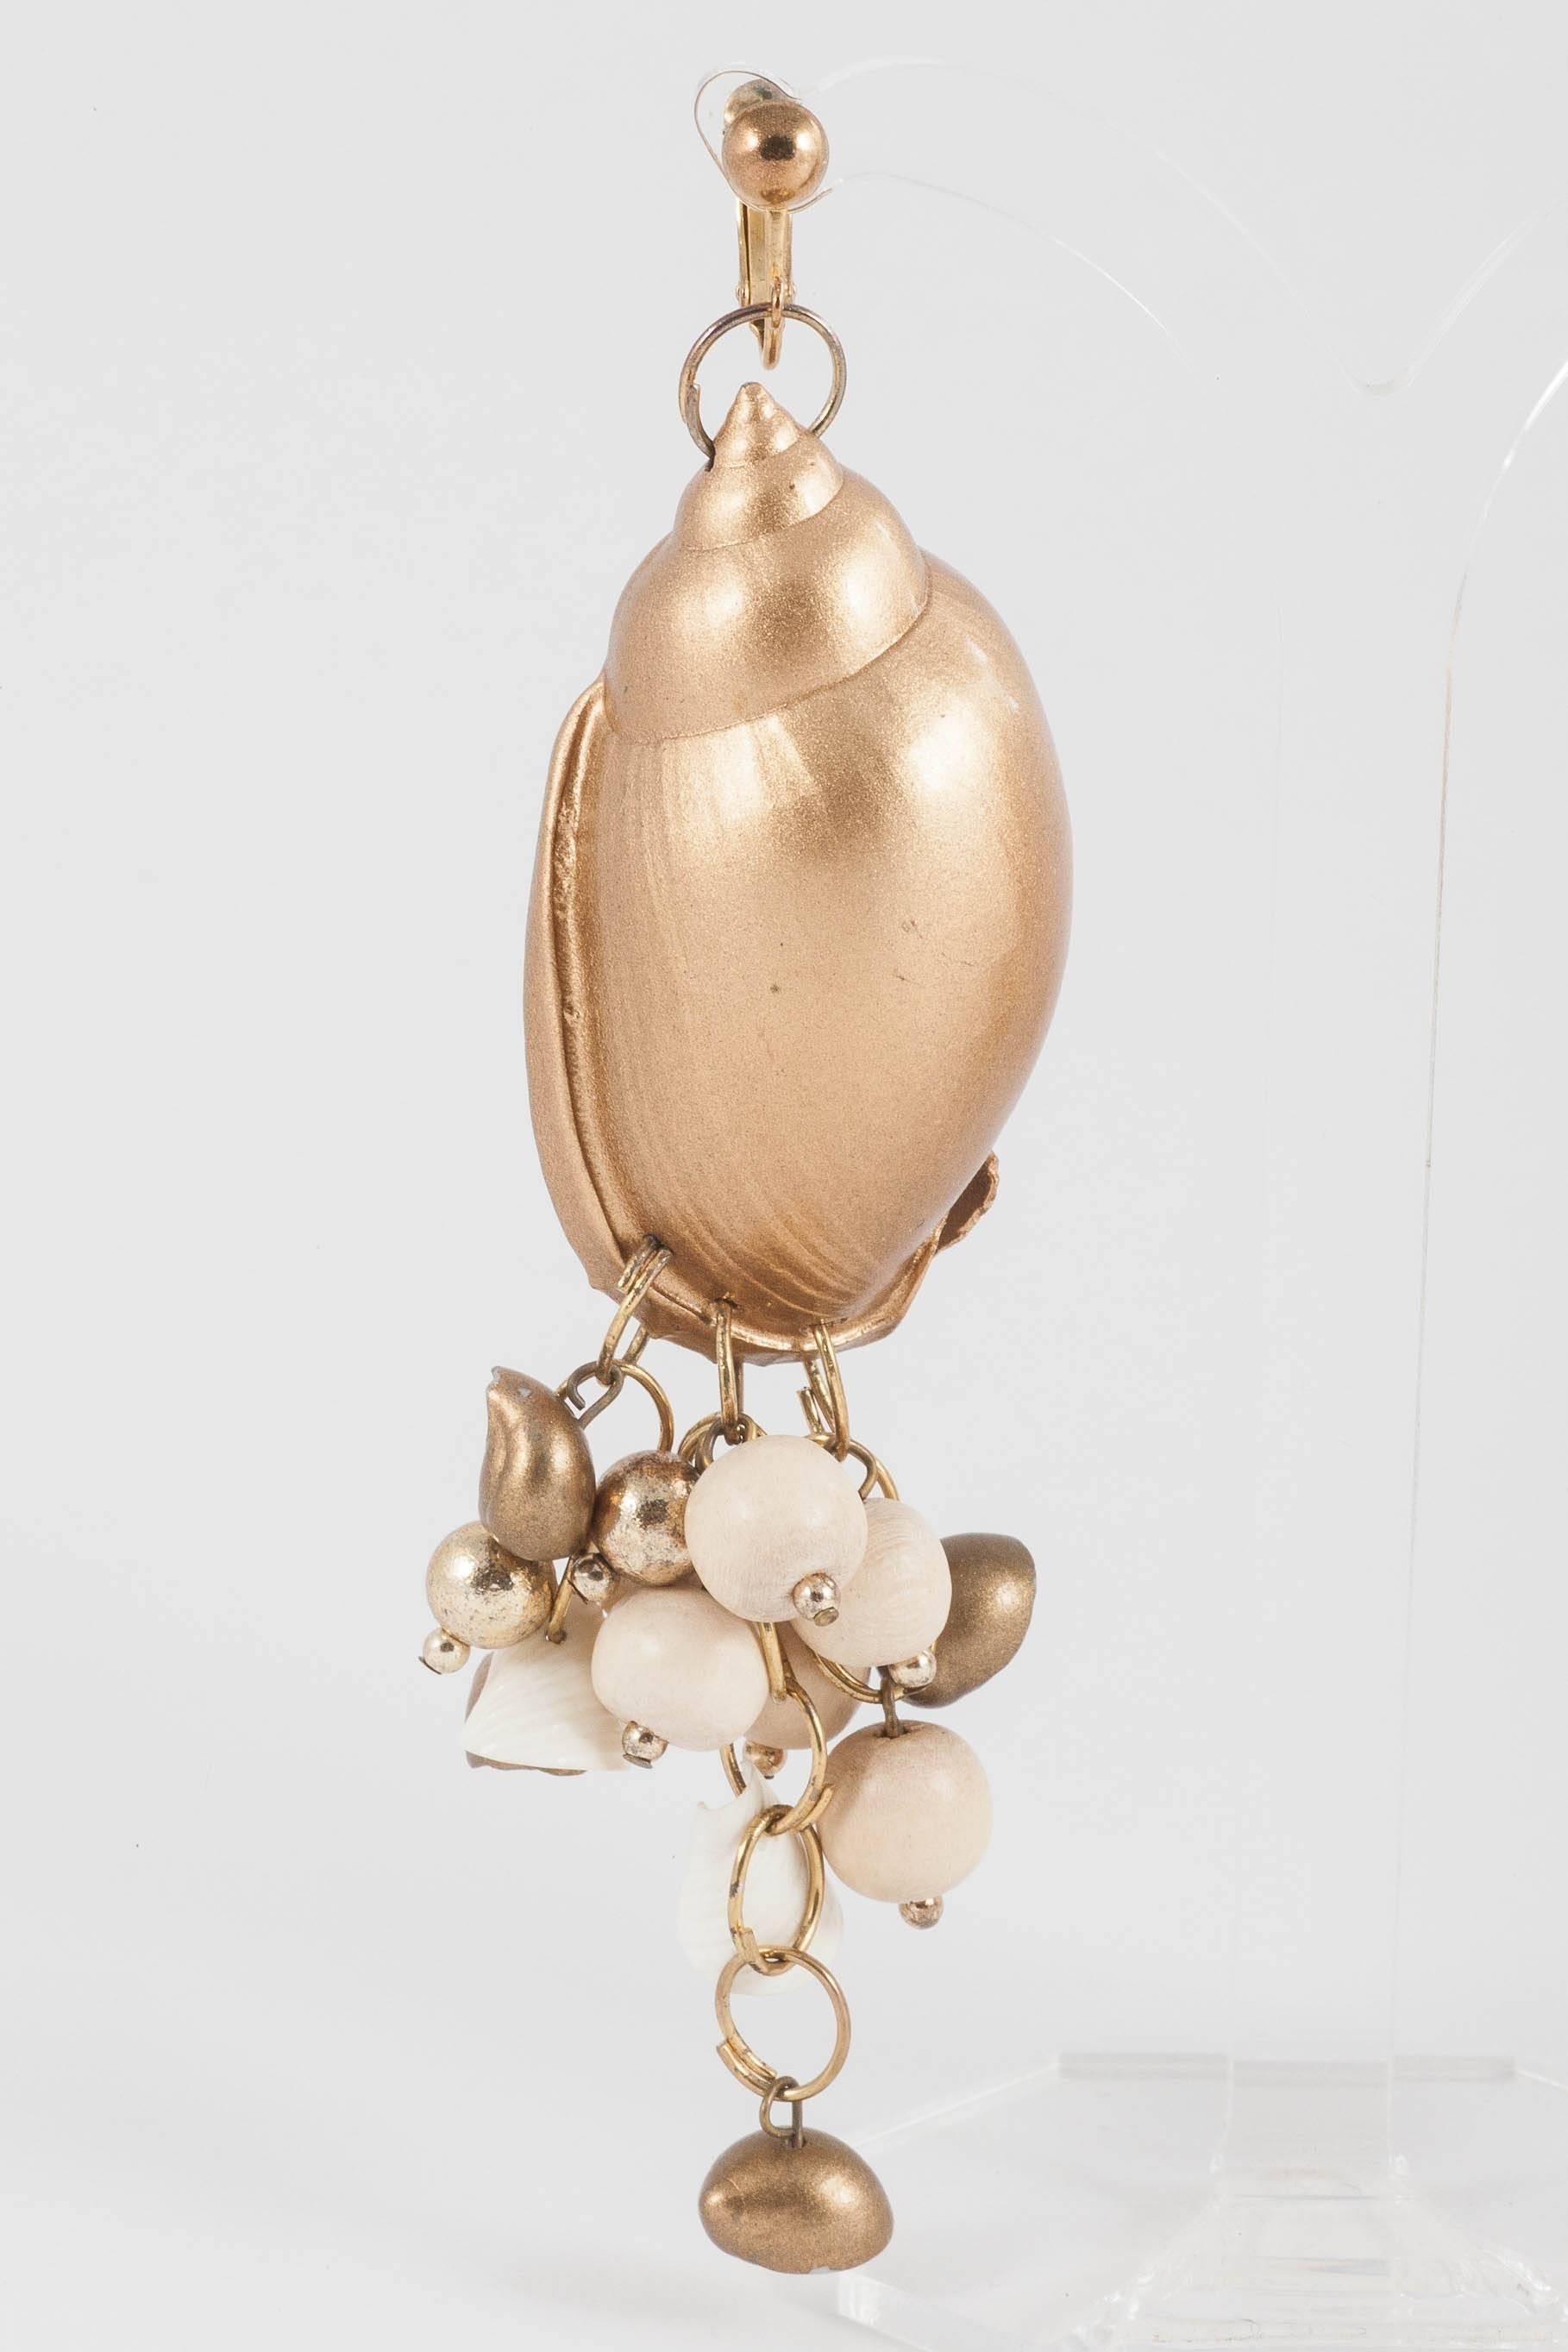 Very long and exotic gilded 'shell' earrings, made from a large gilt shell and cream wooden beads,gilded beads and assorted smaller gilded and plain shells, with adjustable gilt metal clips. Very glamorous and striking,surprisingly light, they have